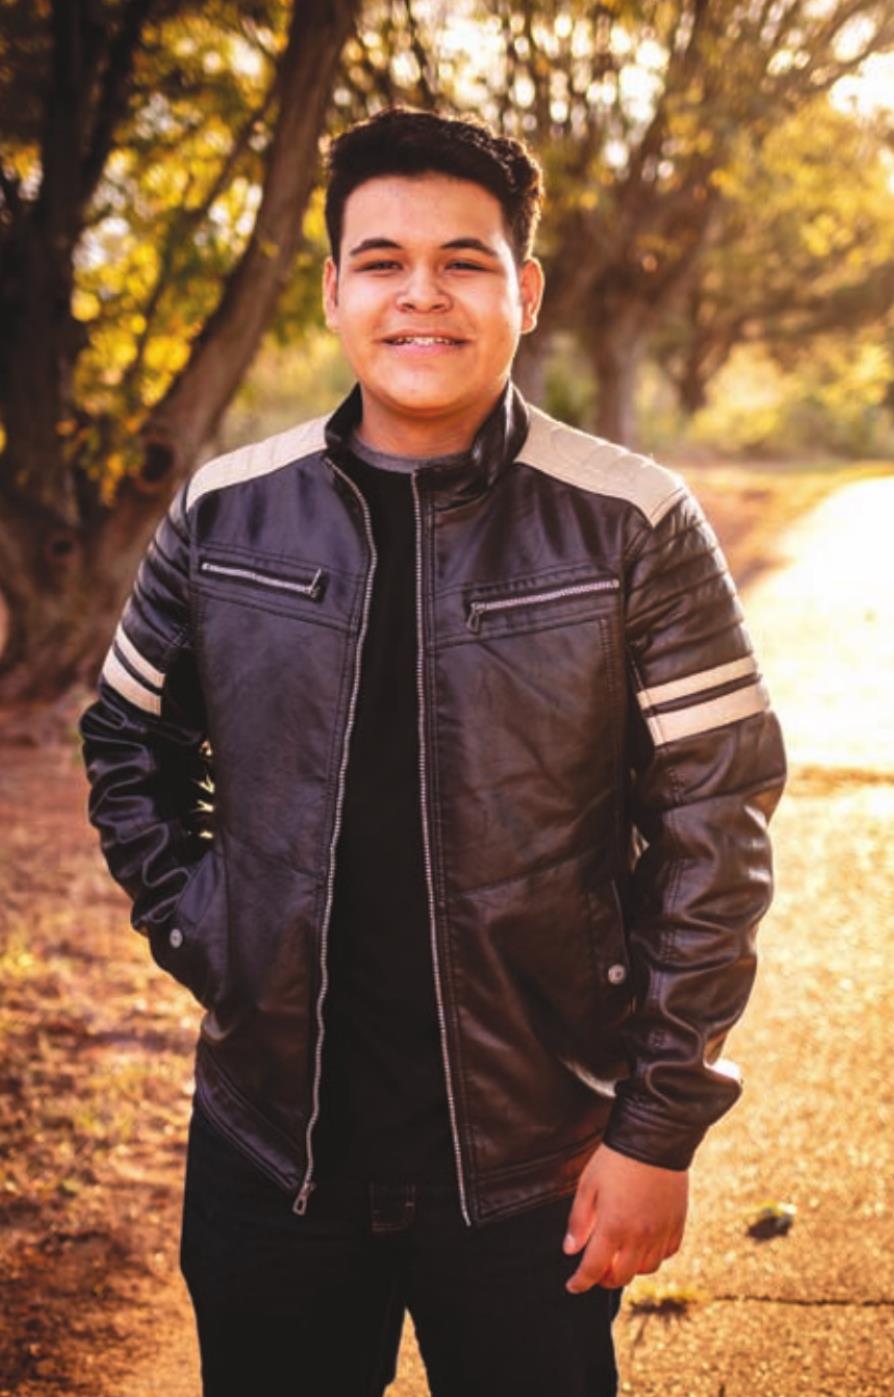 Zahidd Avalos was born in Coahuila, Mexico and has been attending Hydro-Eakly since seventh grade. Provided